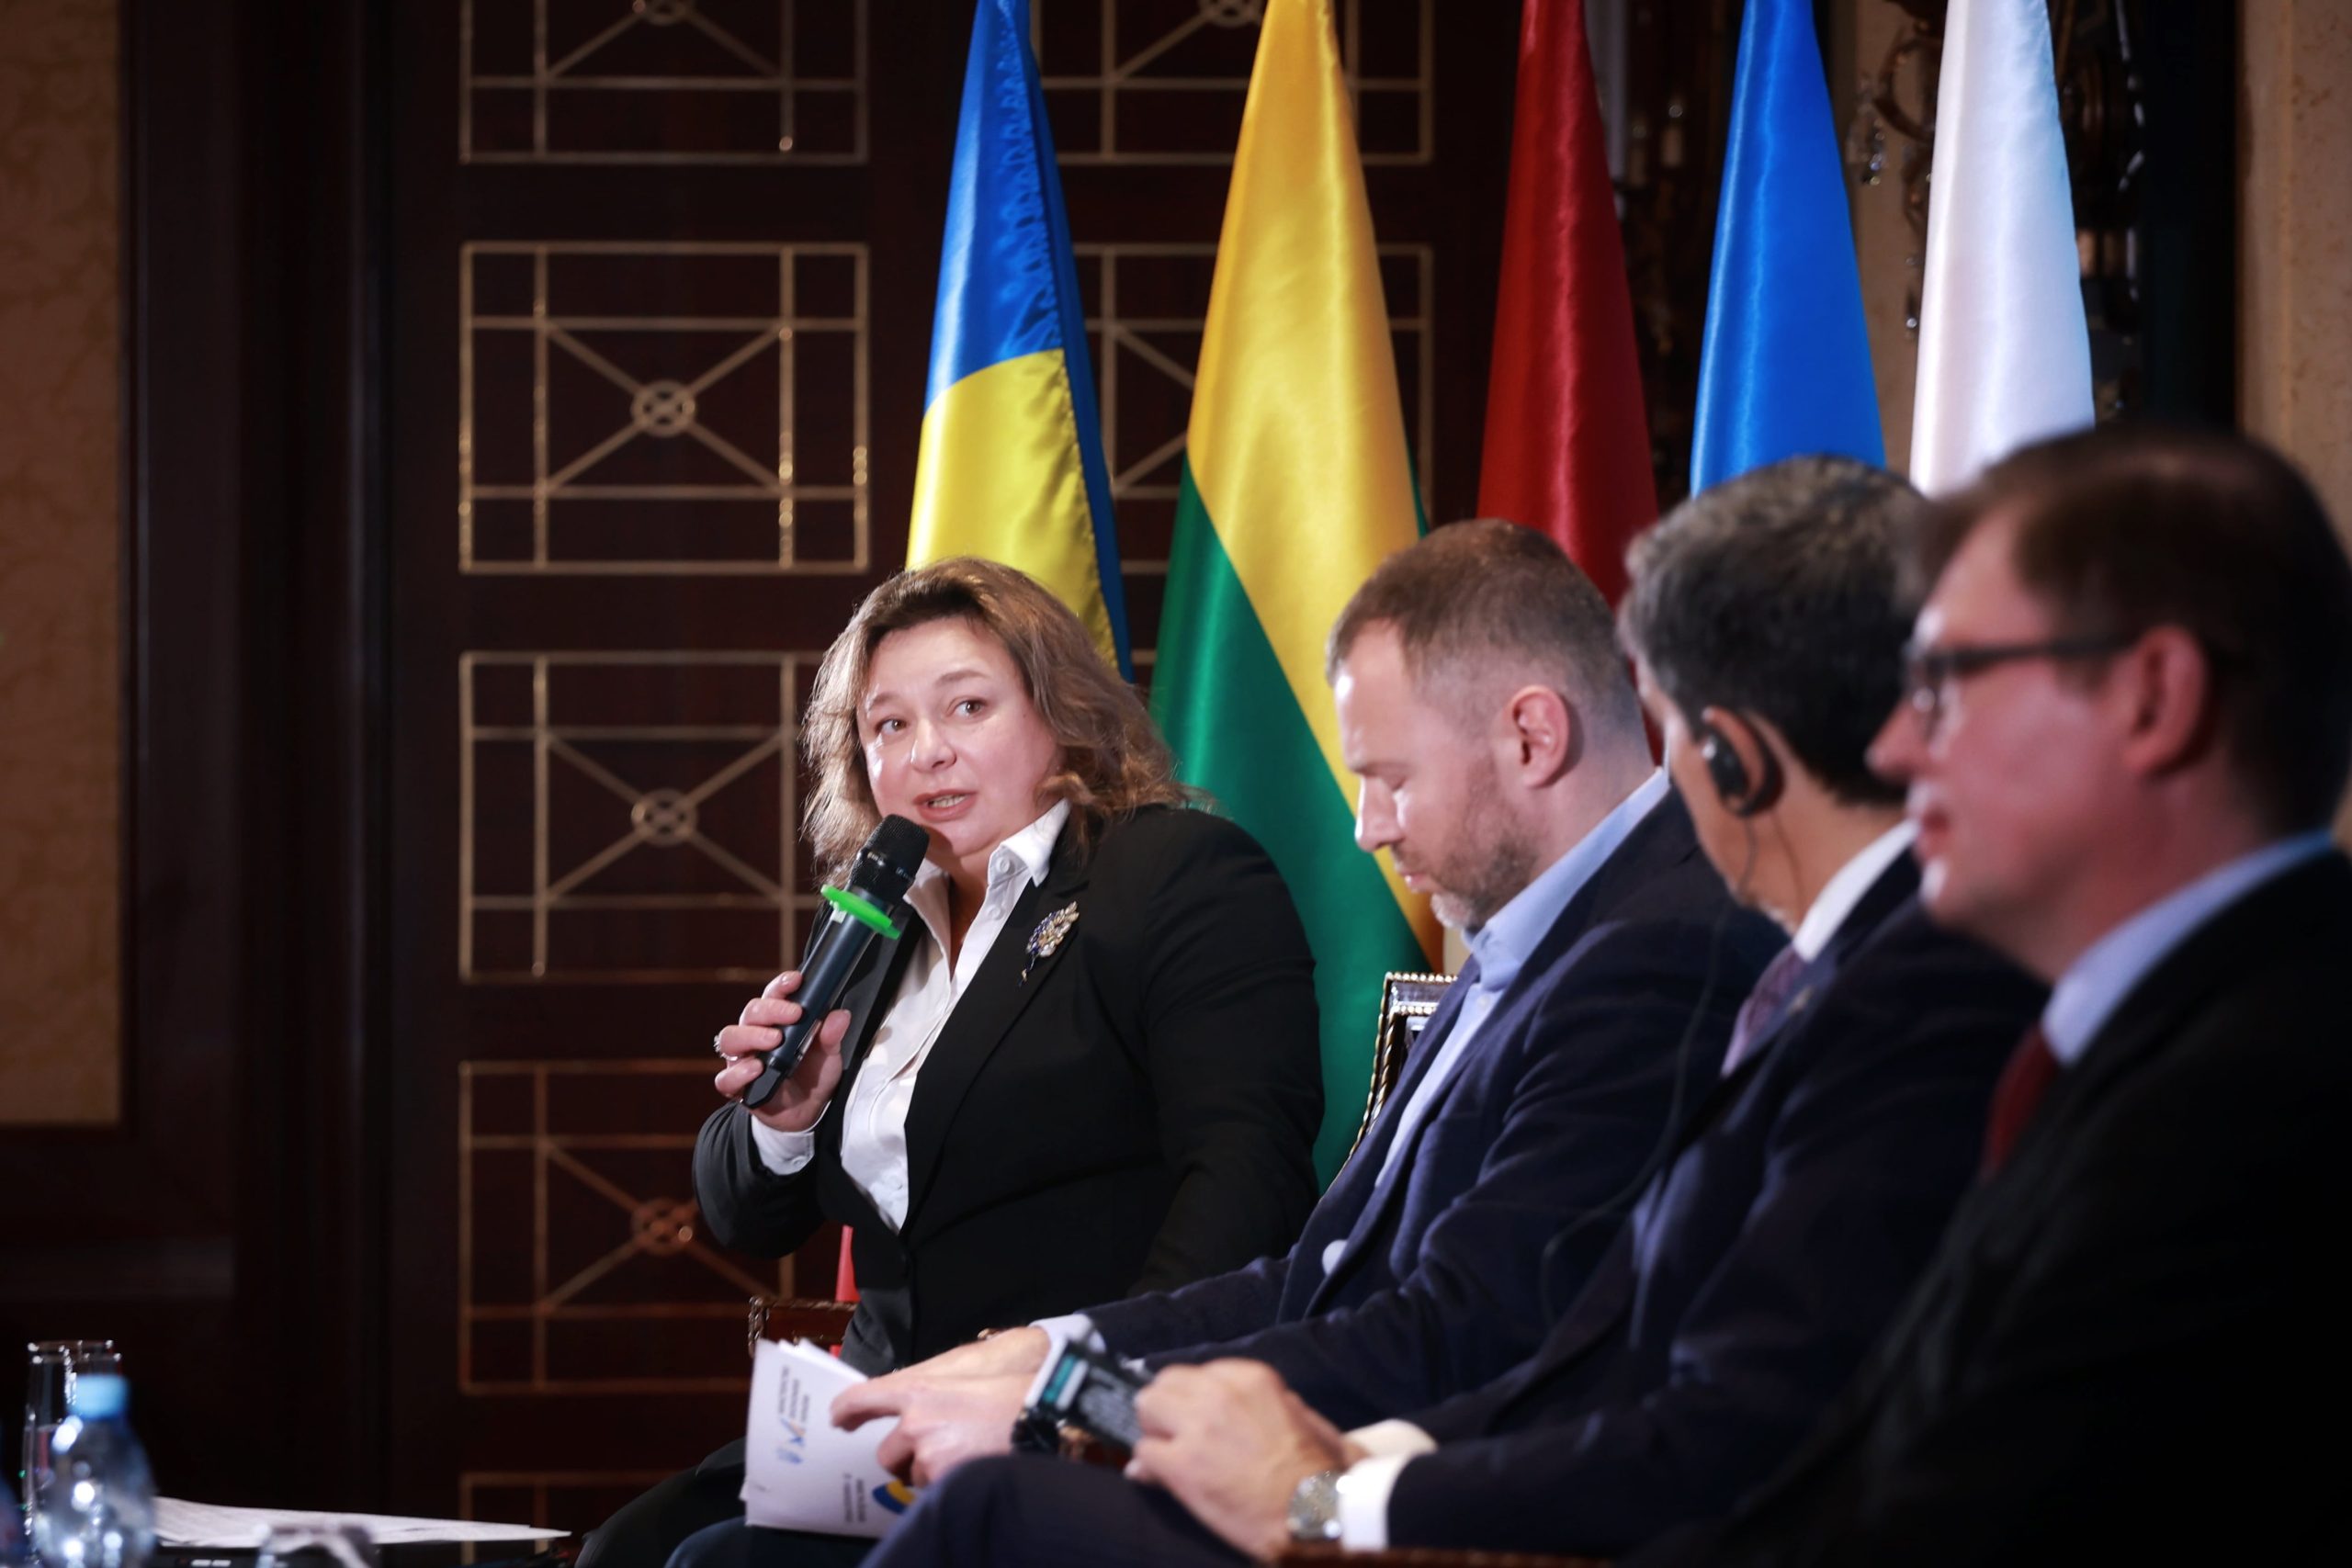 Head of the IP Office Olena Orliuk: Ukraine shall provide the level of IP services corresponding to best European practices